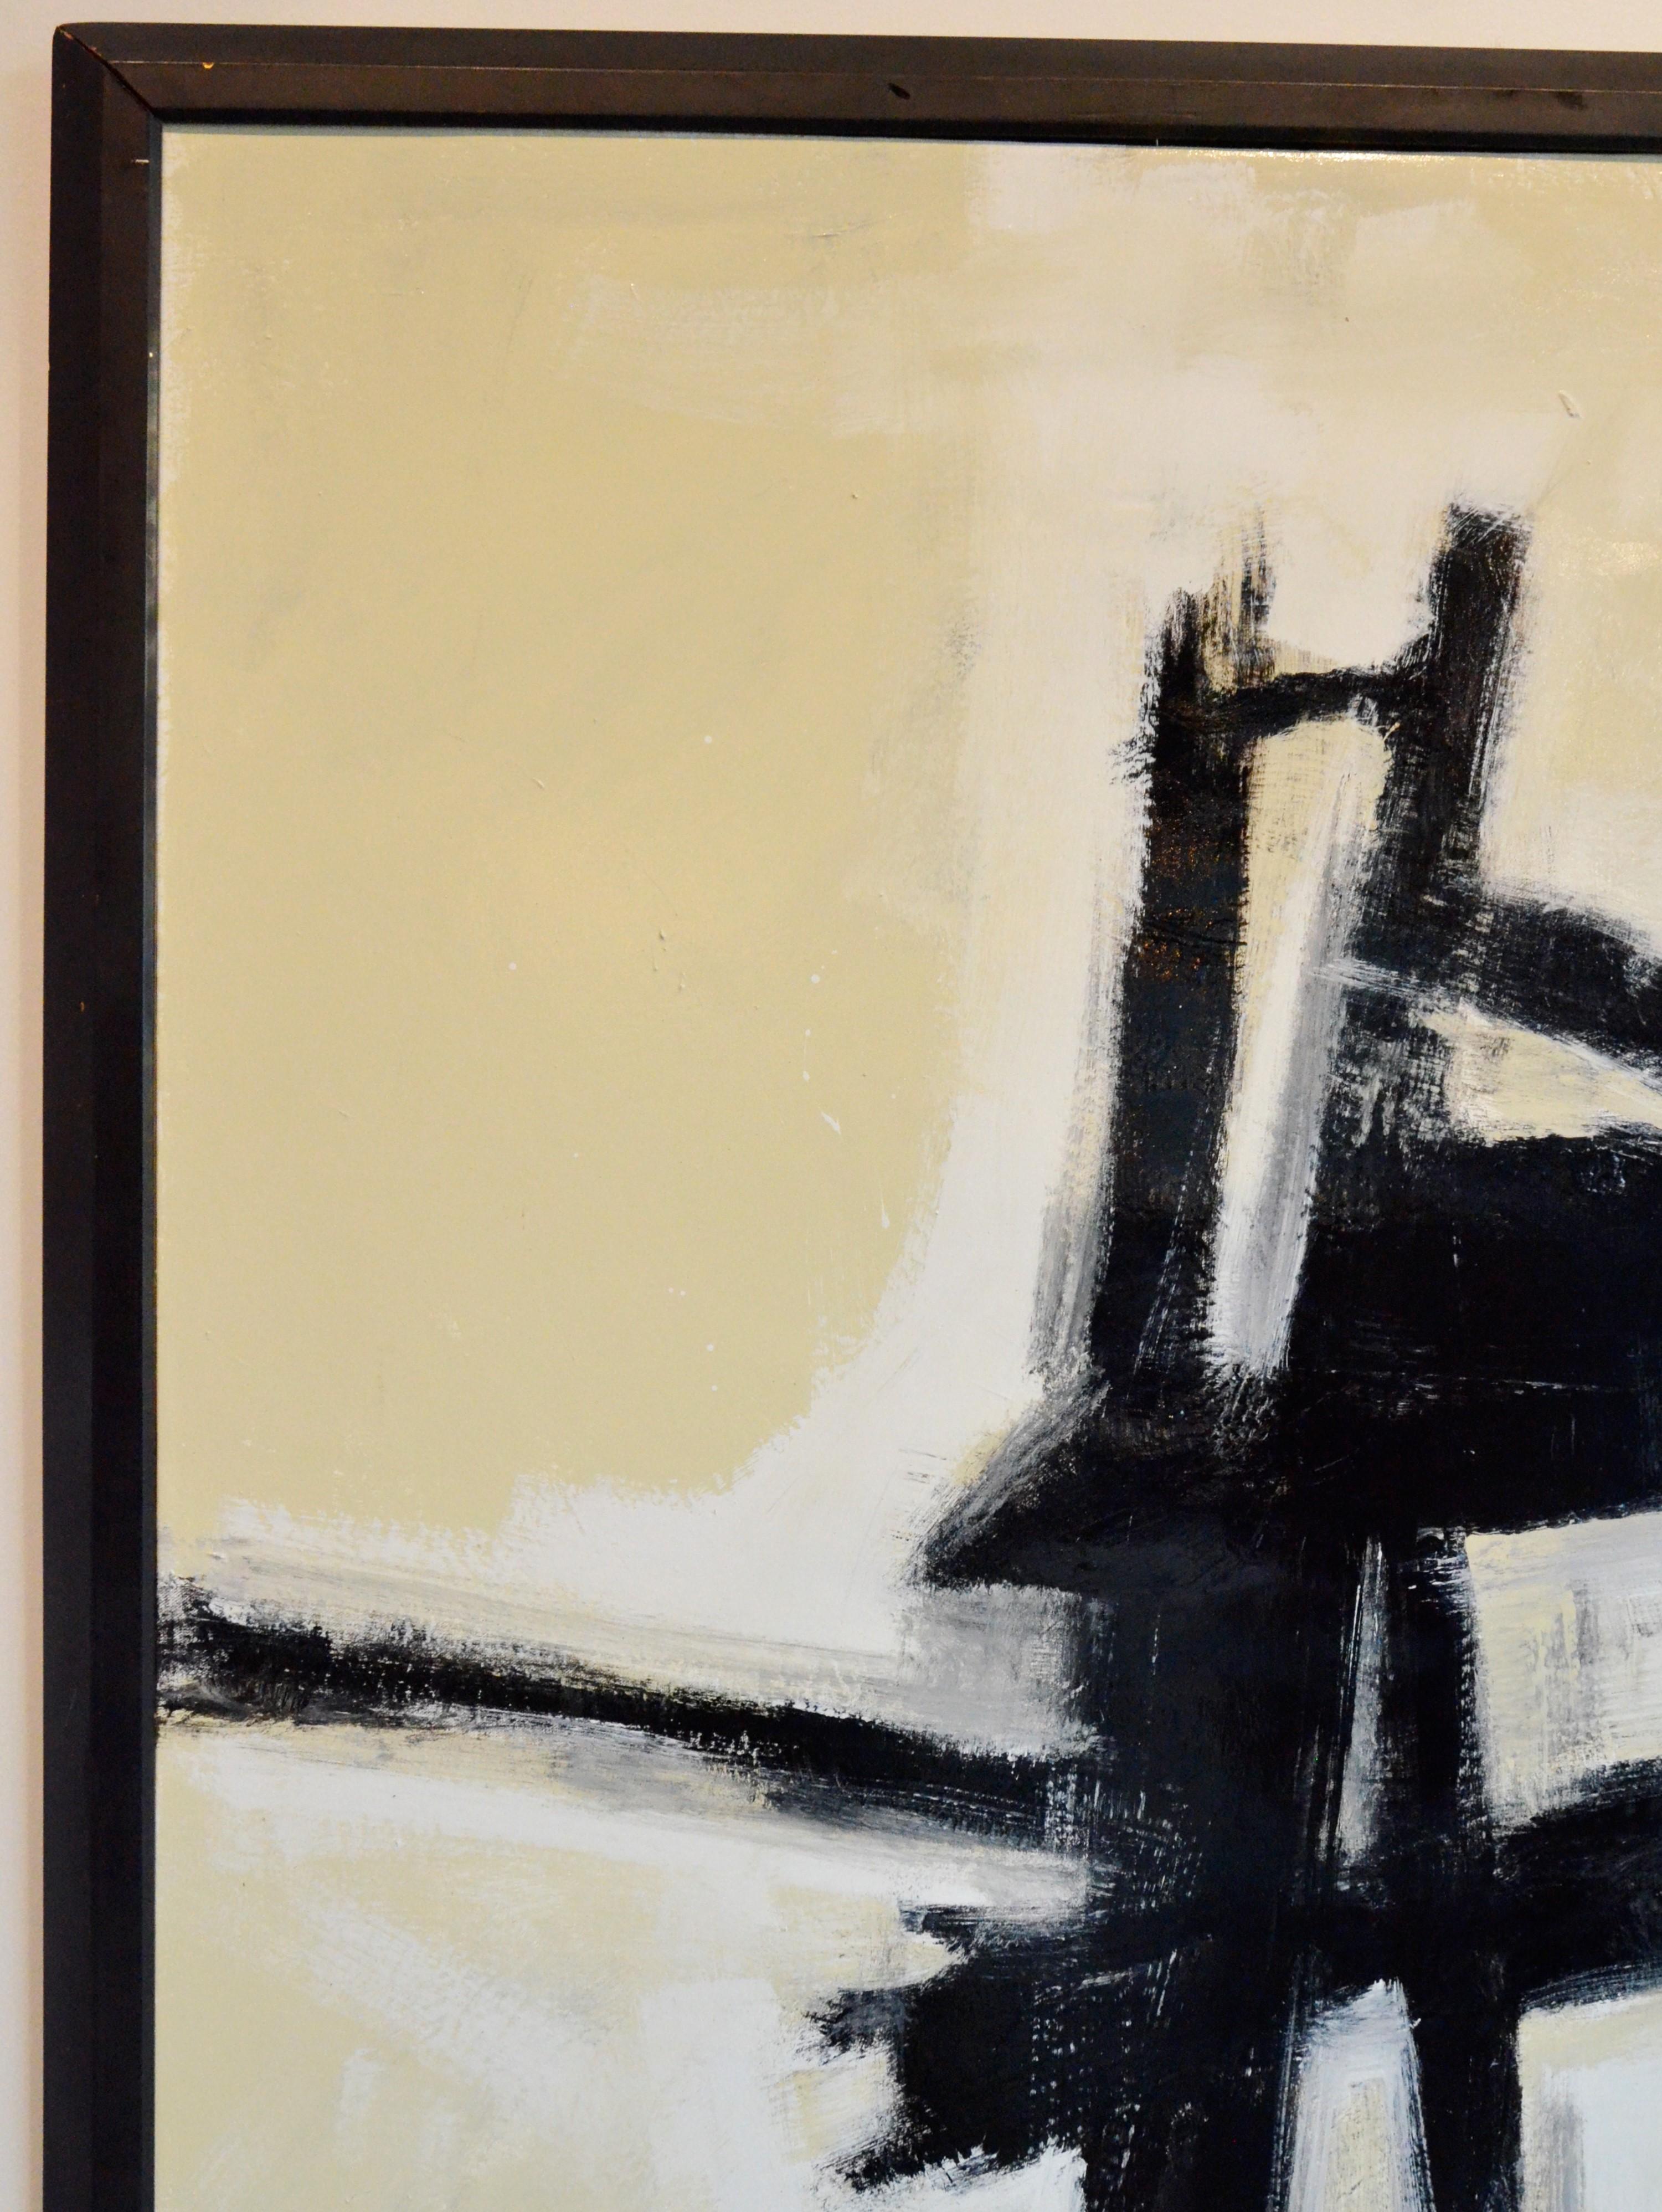 Offered is an original unsigned abstract Expressionist Franz Kline style white, off-white and gray background with thick black strokes painting framed in black wood painting on stretched canvas. The work from this unknown artist seems to draw its